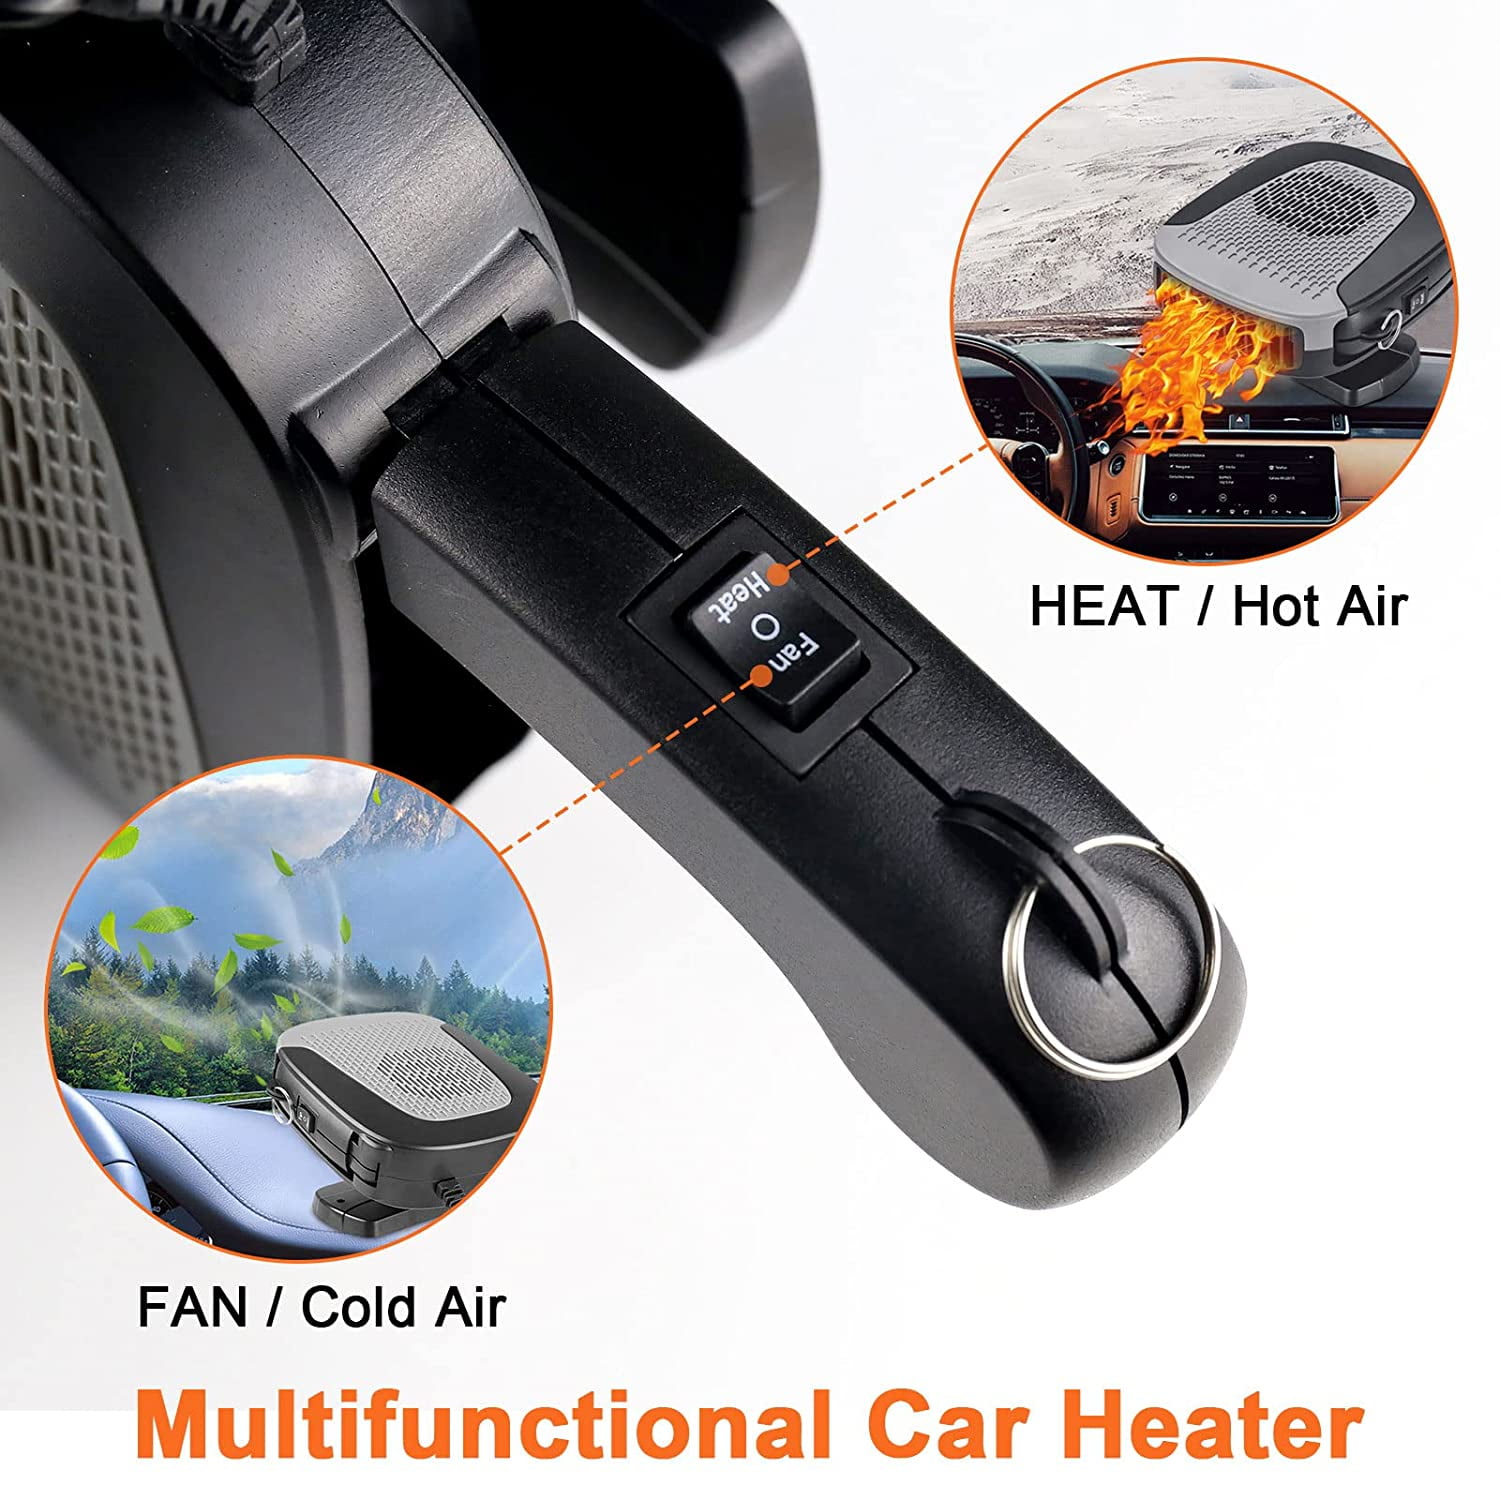 Datanly Portable Car Heater 12V Car Heater That Plugs into Cigarette  Lighter, Defroster for Car Windshield, 150W 2 in 1 Heating and Cooling Fast